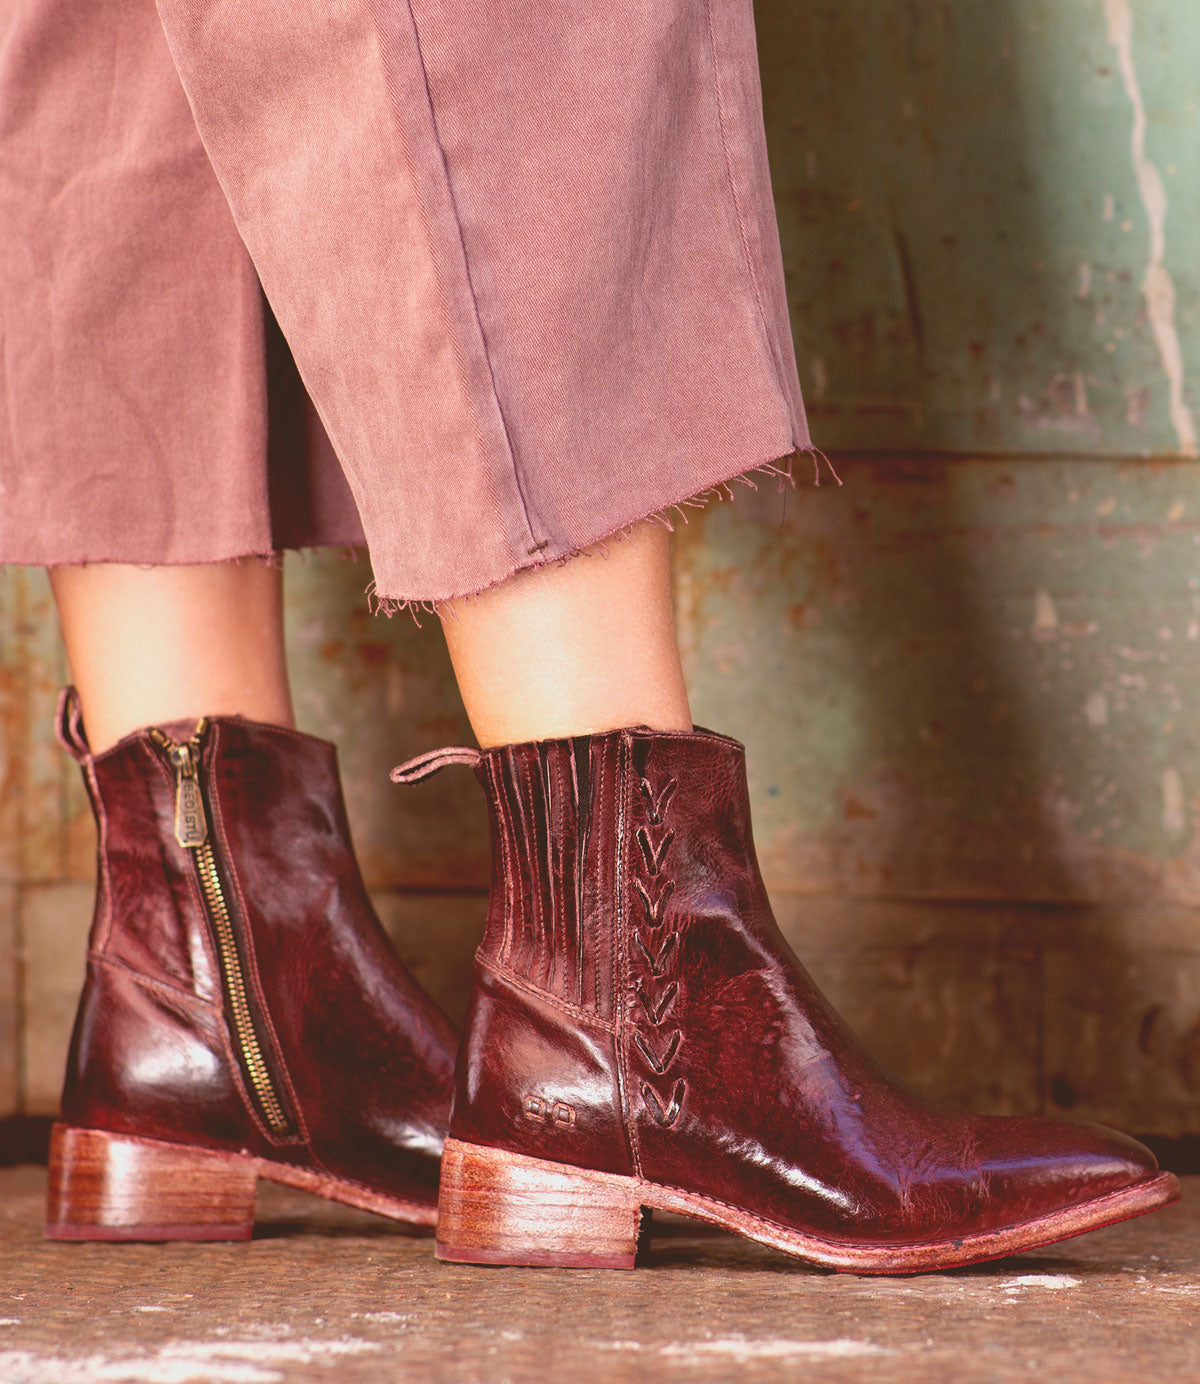 A woman wearing a pair of Bed Stu Alina burgundy leather ankle boots in the city.